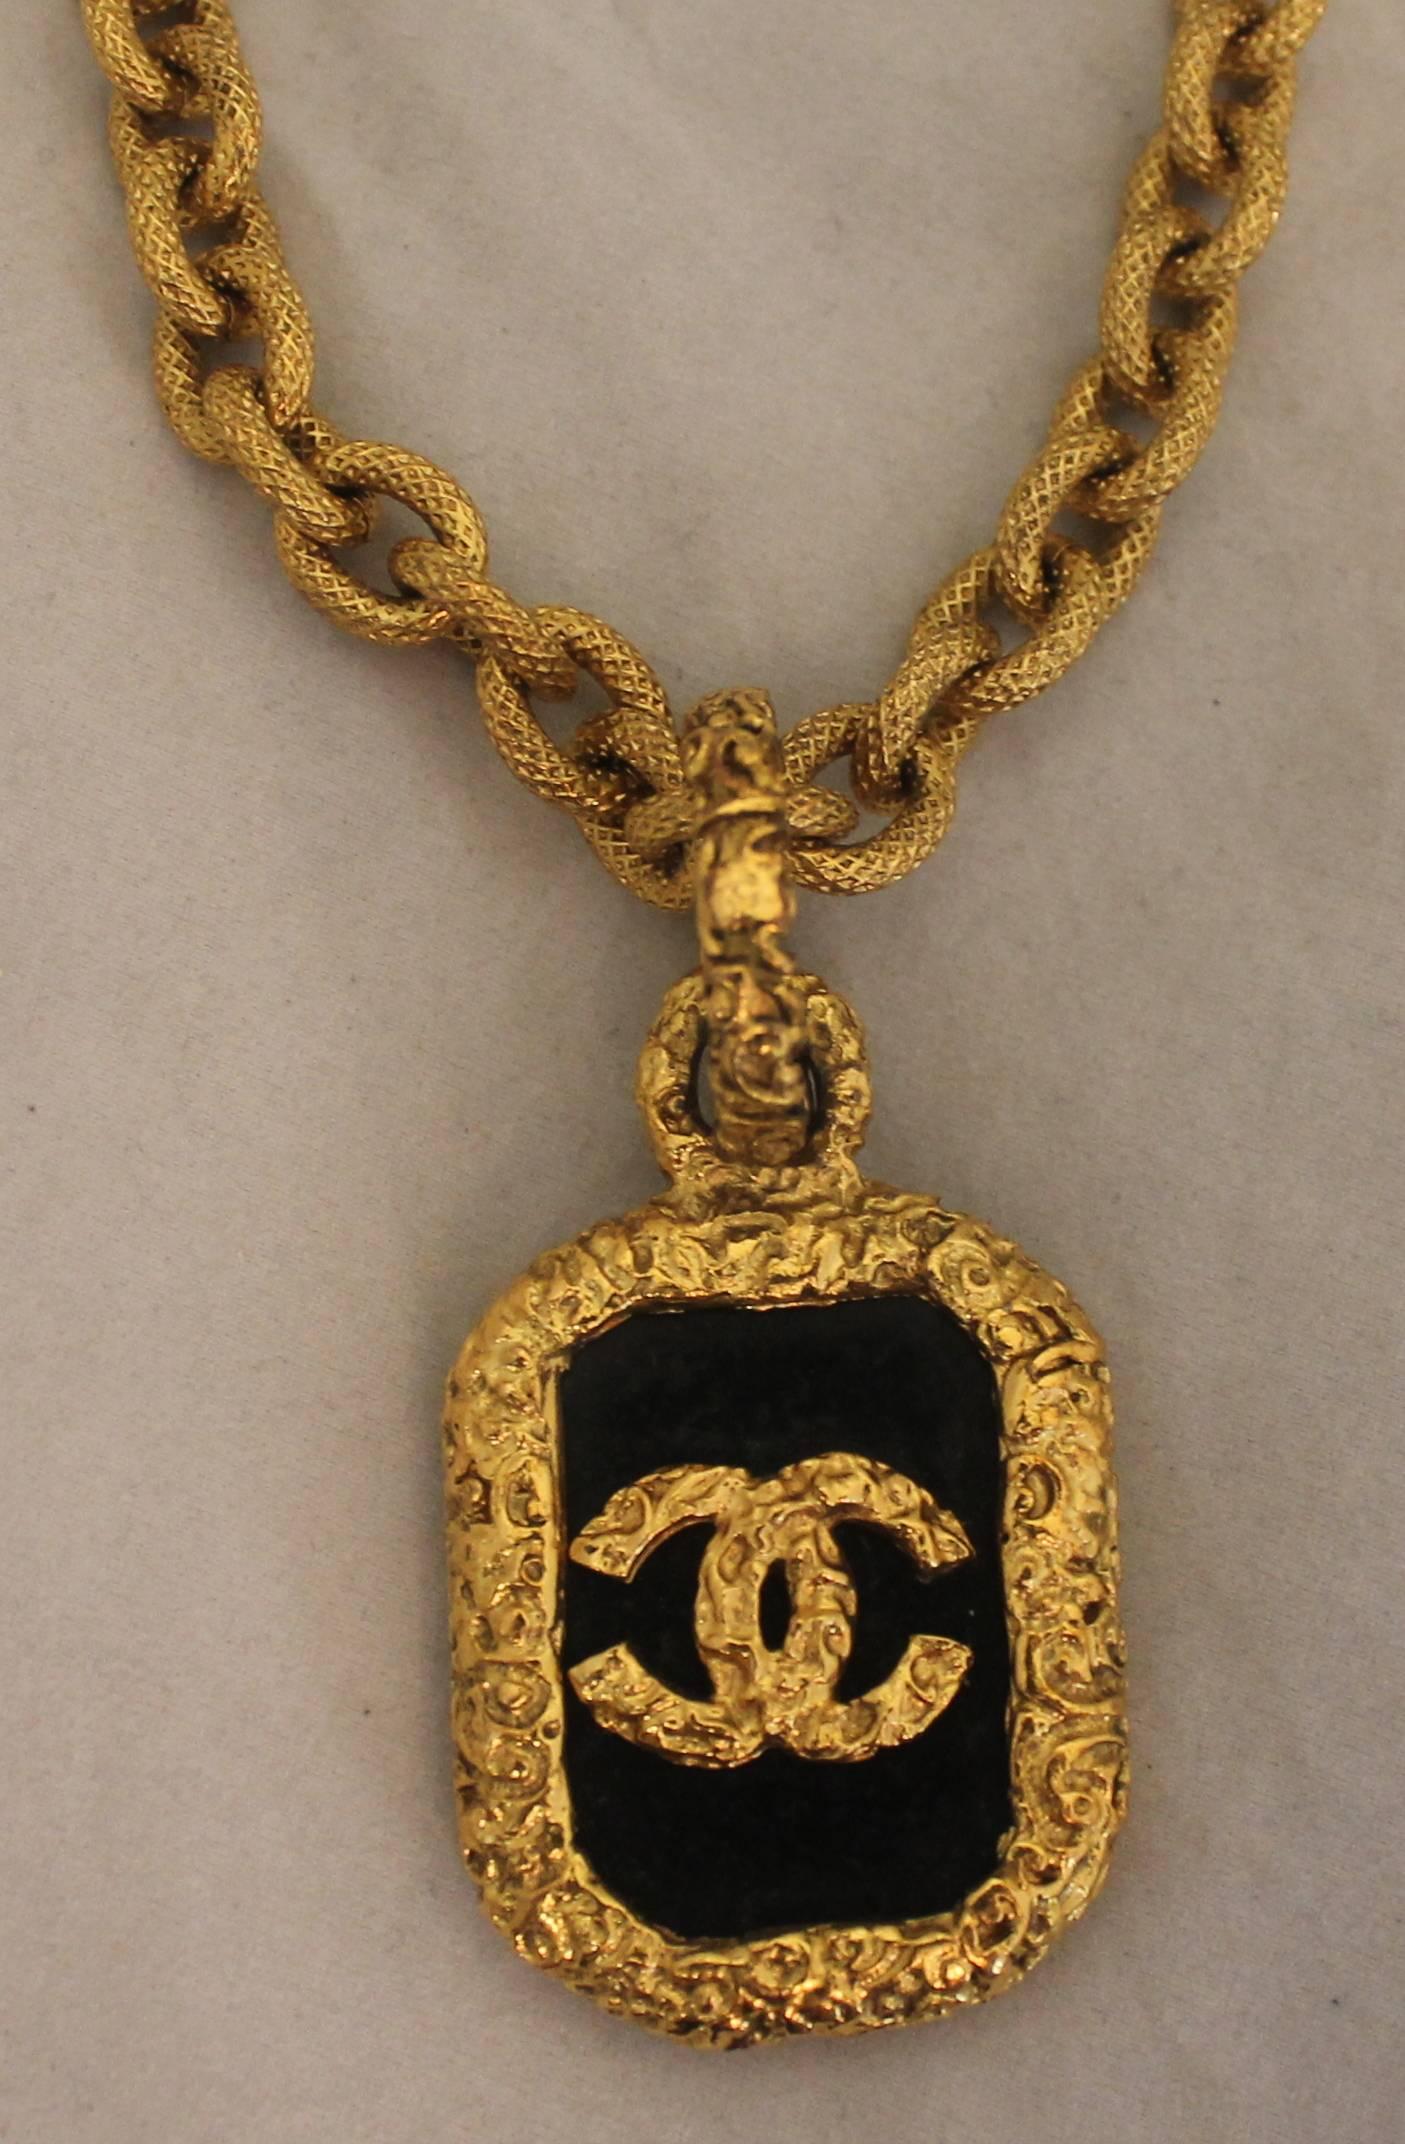 Chanel Goldtone Byzantine Link Necklace with Black Glass Pendant  - Circa 96. This vintage piece is in excellent condition and has an amazing look. The link has a different texture than the pendant giving it a Baroque-Byzantine look that is classic